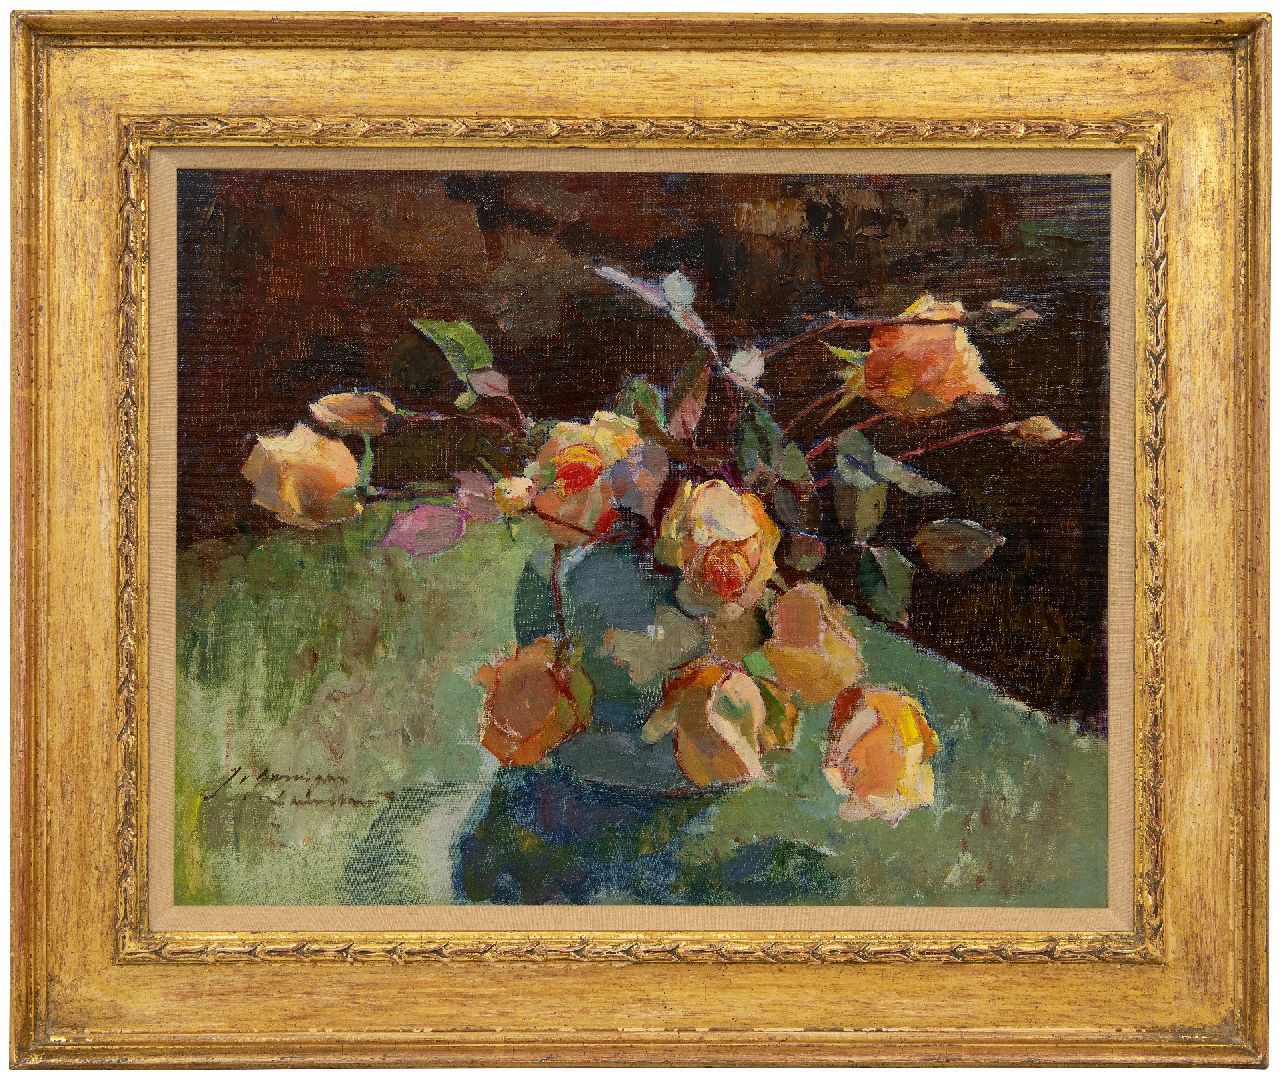 Groningen-Laurillard J.A.G. van | 'Jacoba' Adriana Geertruida van Groningen-Laurillard | Paintings offered for sale | Flower stilllife with yellow roses, oil on canvas laid down on panel 39.7 x 49.9 cm, signed l.l.